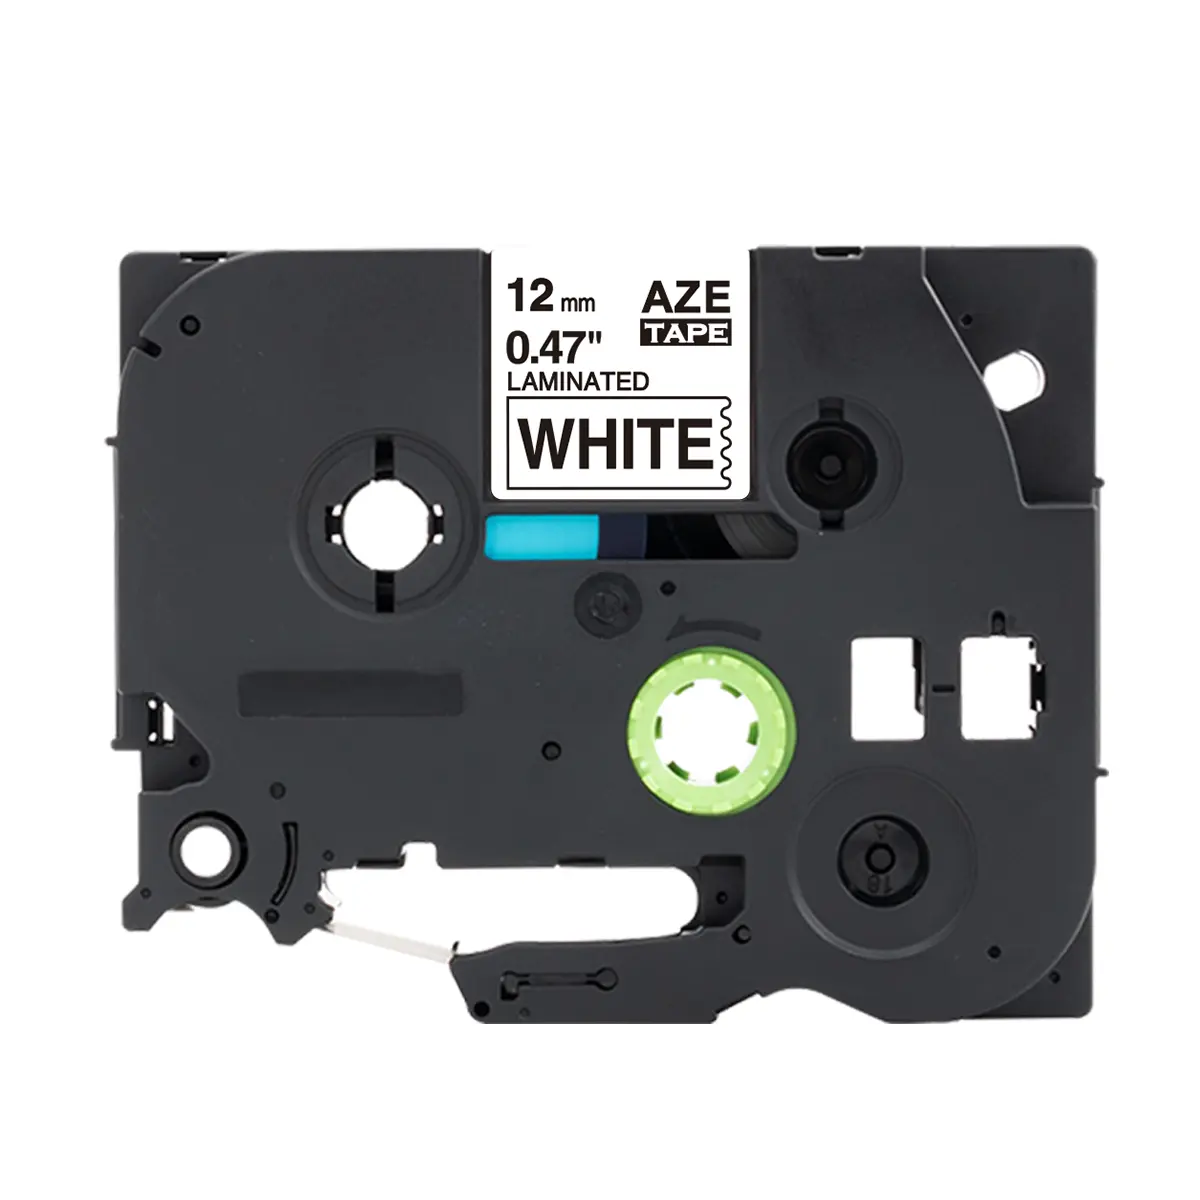 Aimo Aze Waterproof 12mm Black Writing White tze-231 Laminated Label Tape for B Printer